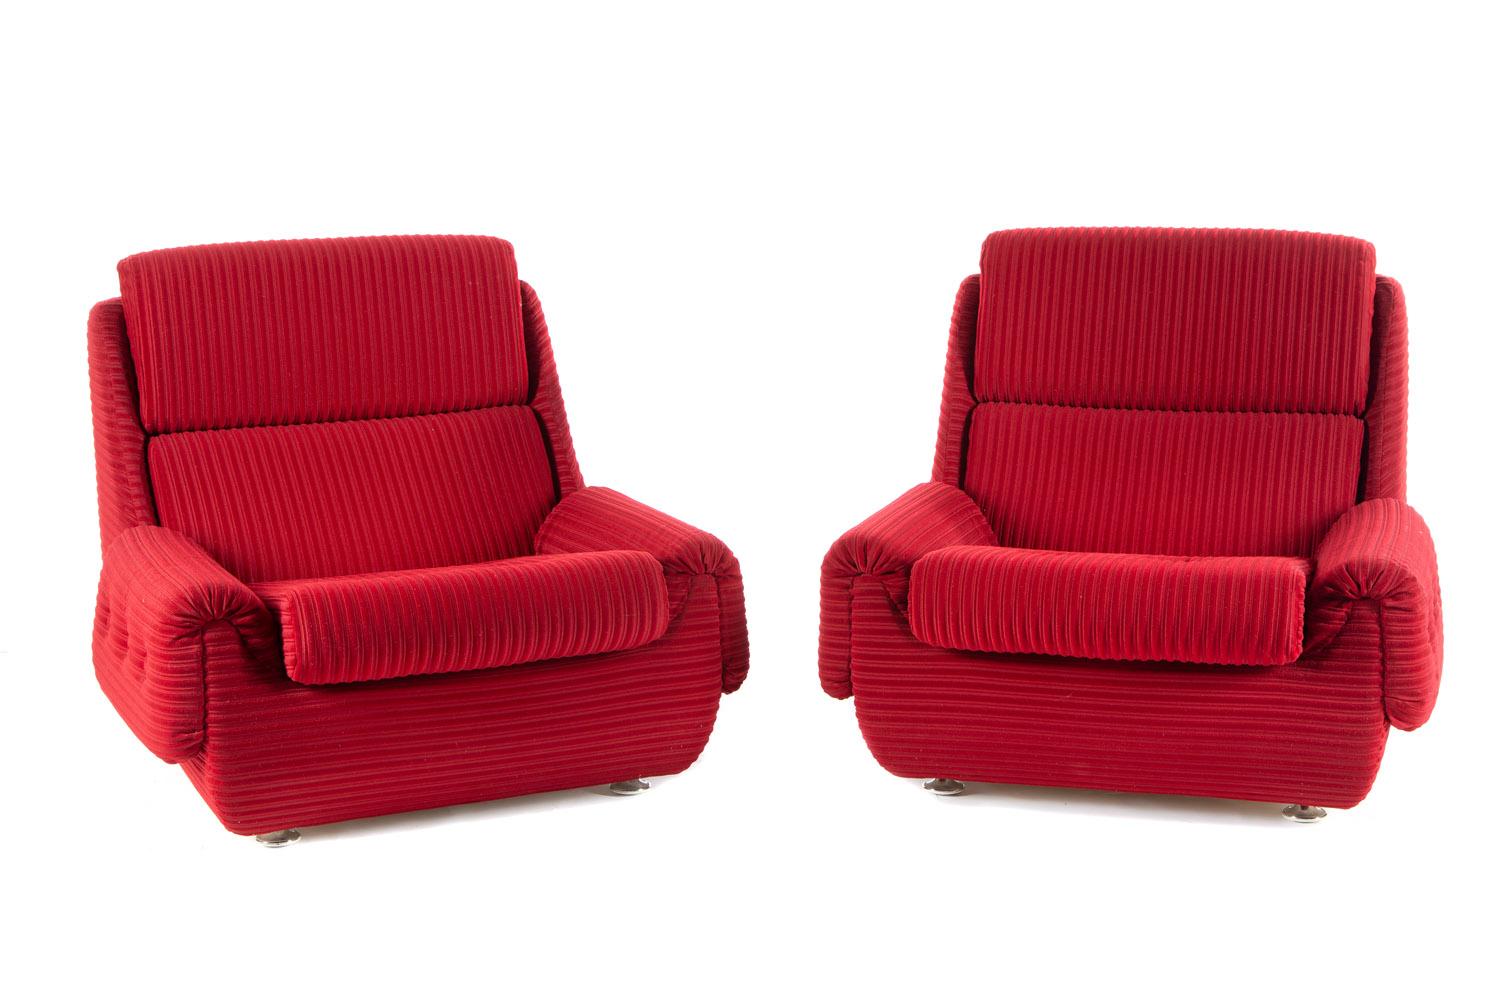 Fabric A set of Sofa and 2 Arm Chairs by Jitona Soběslav, 1970s For Sale